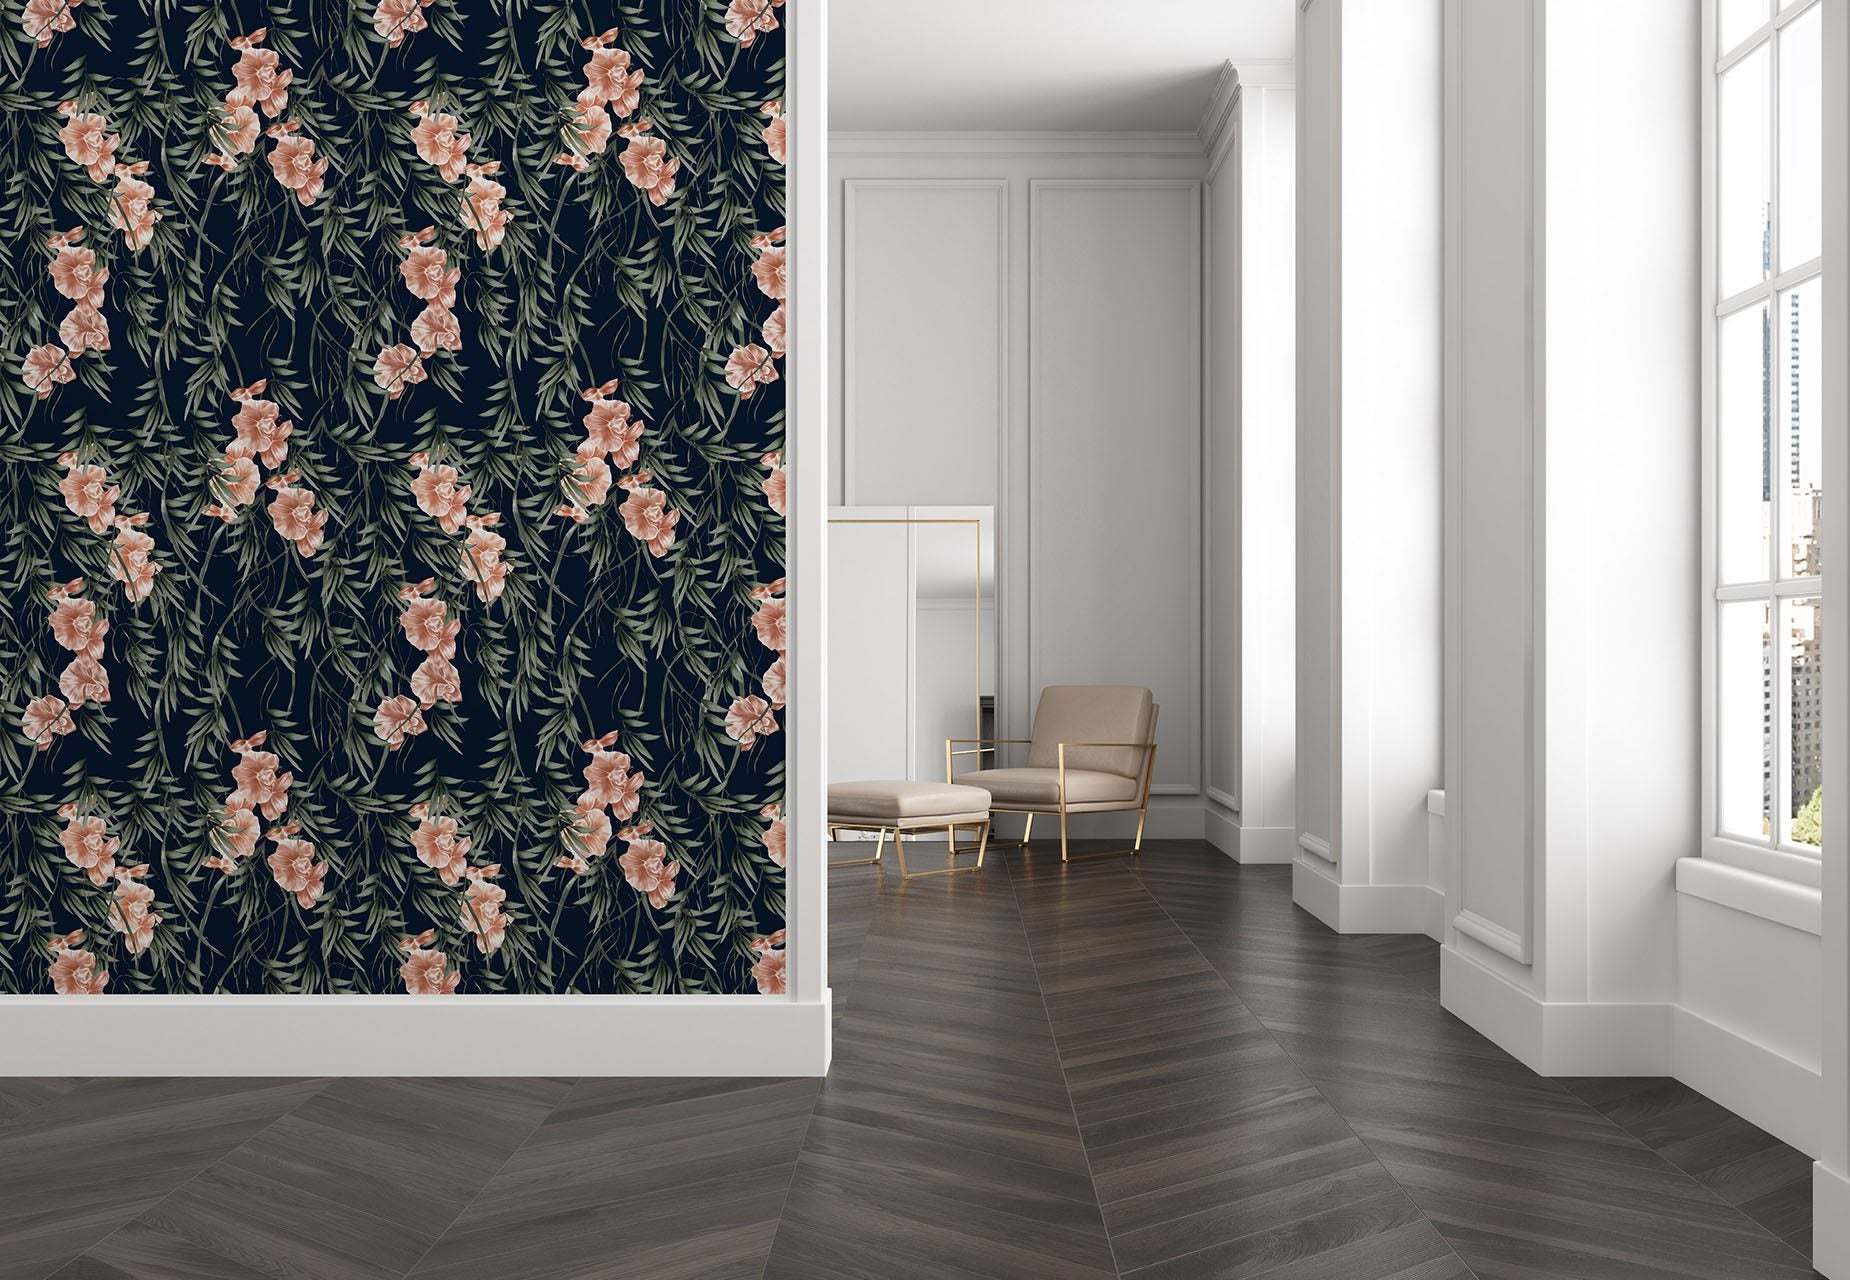 Wall&Deco's wallpapers are designed to be explored with the hands